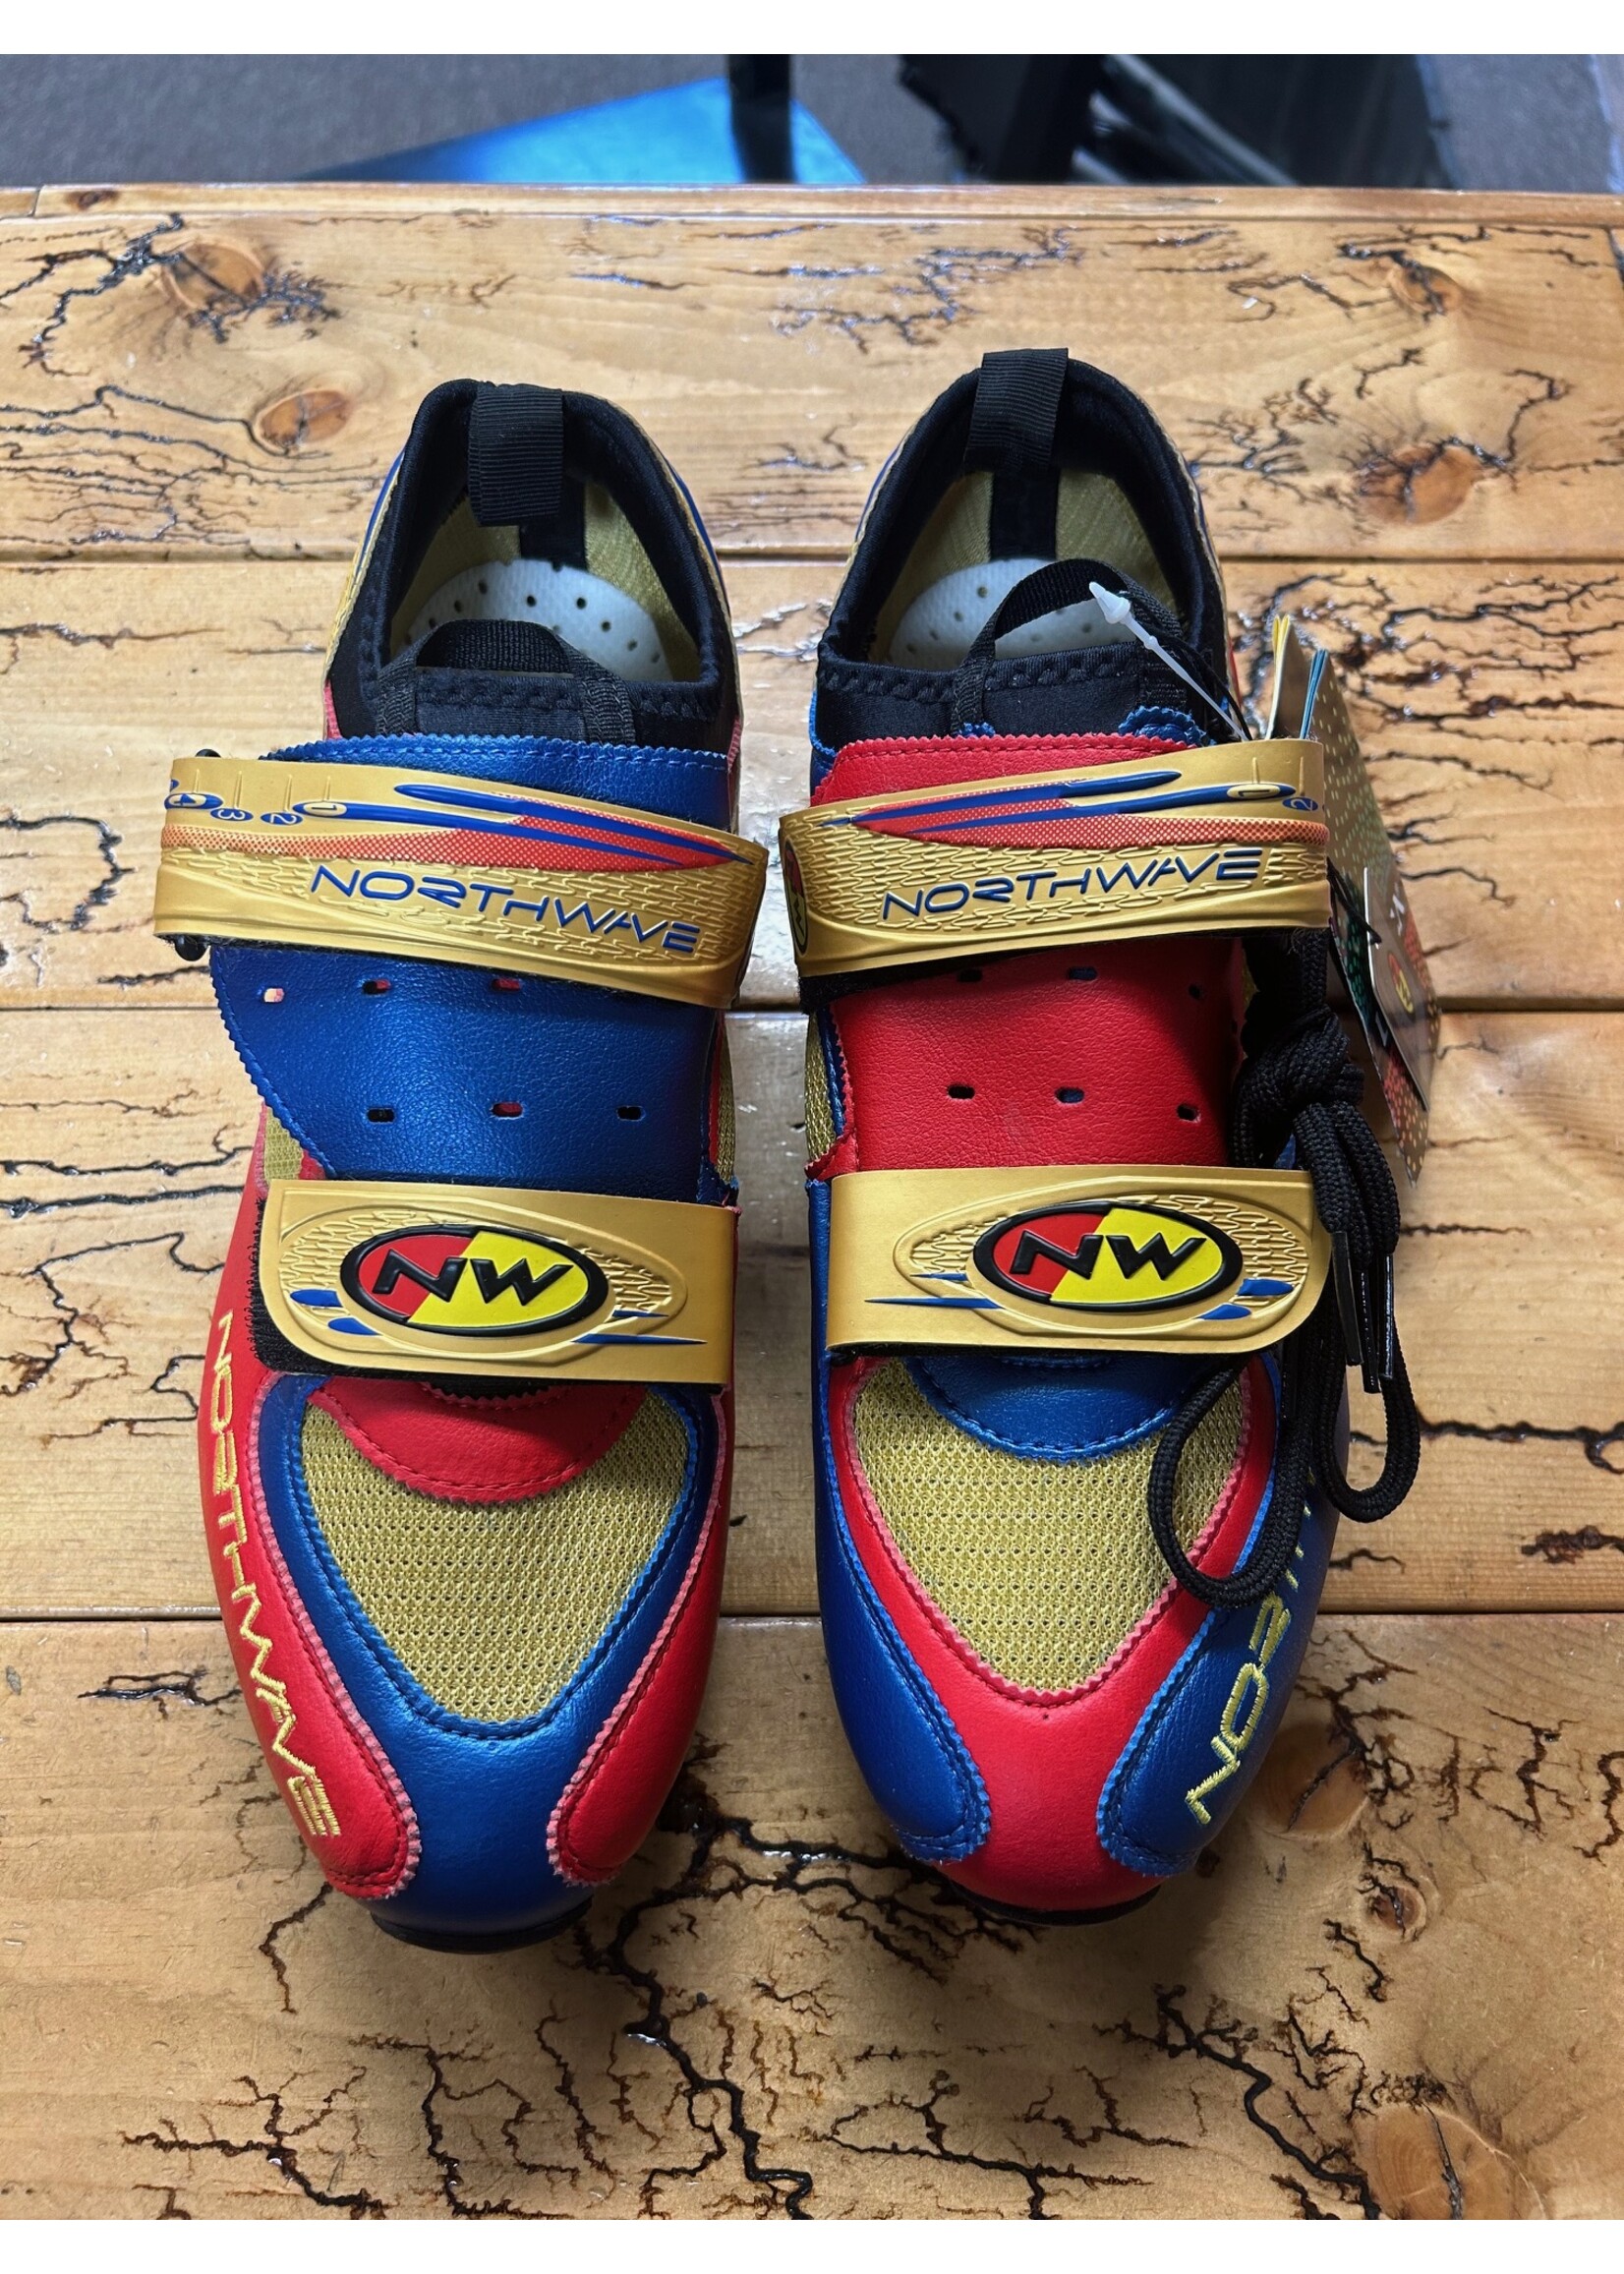 Northwave Northwave New Compact Red / Blue 45.5 Mountain Bike Shoes NOS